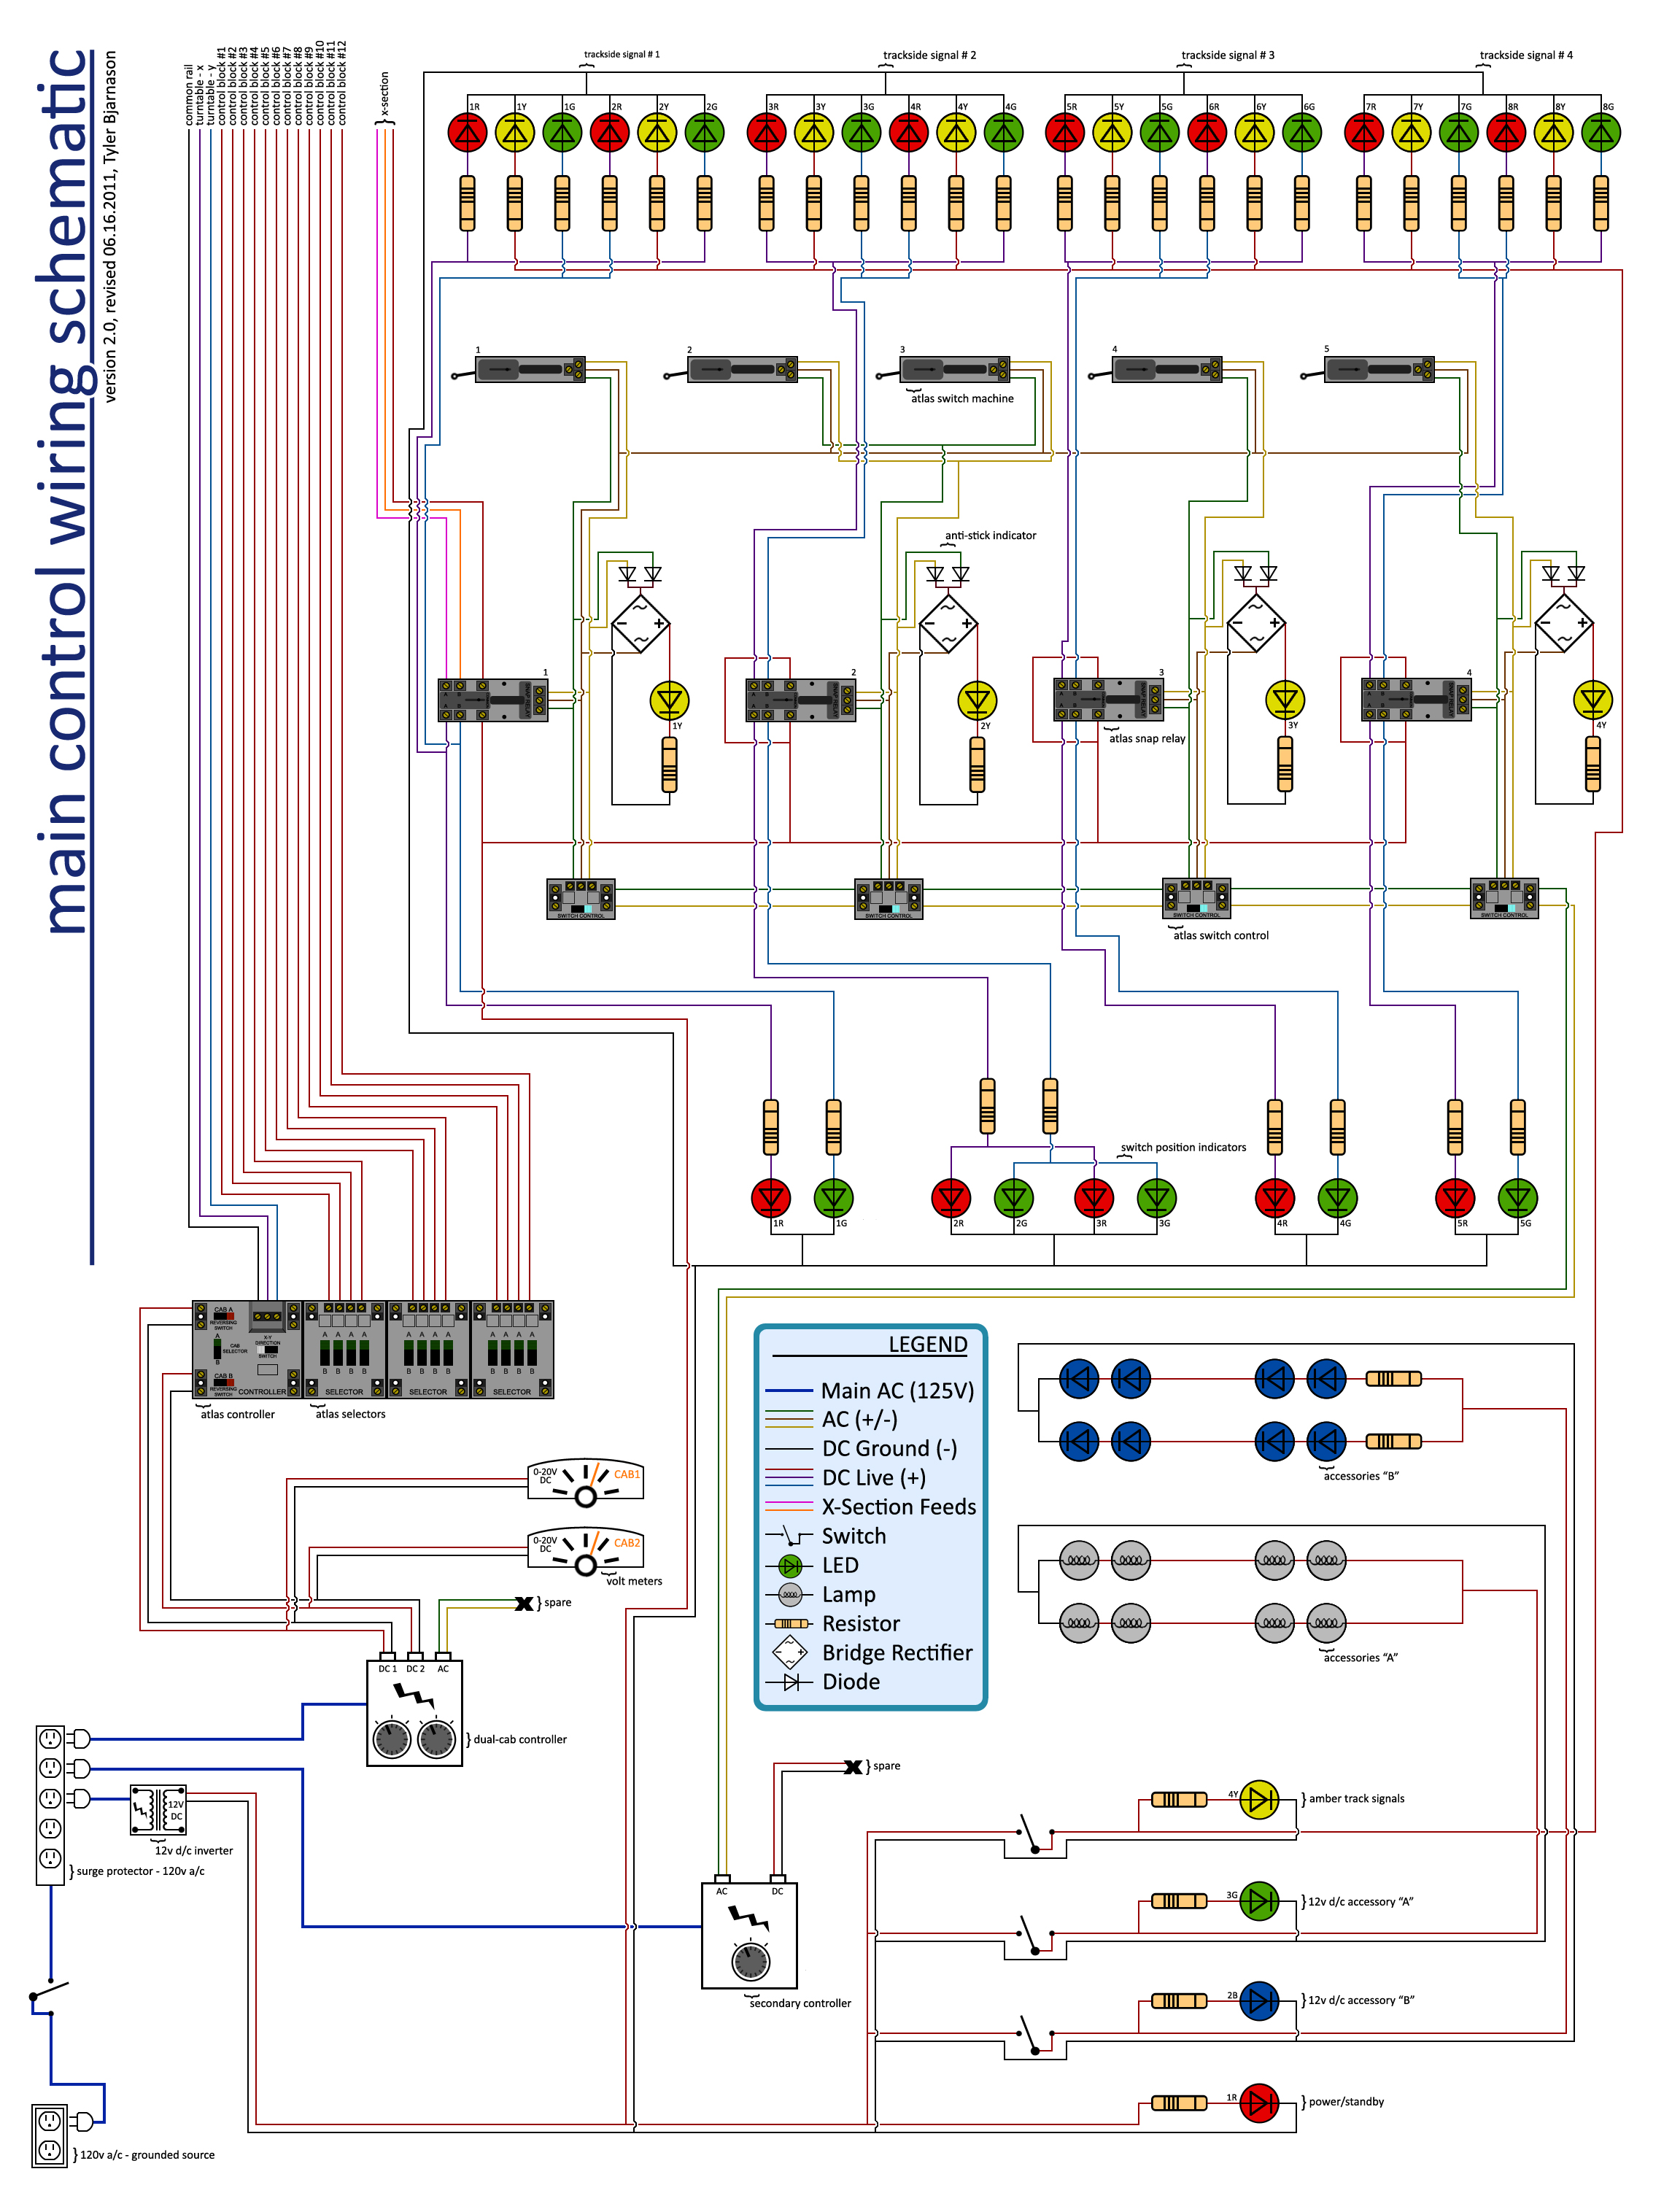 Main wiring diagram for a DC model railroad layout and control panel